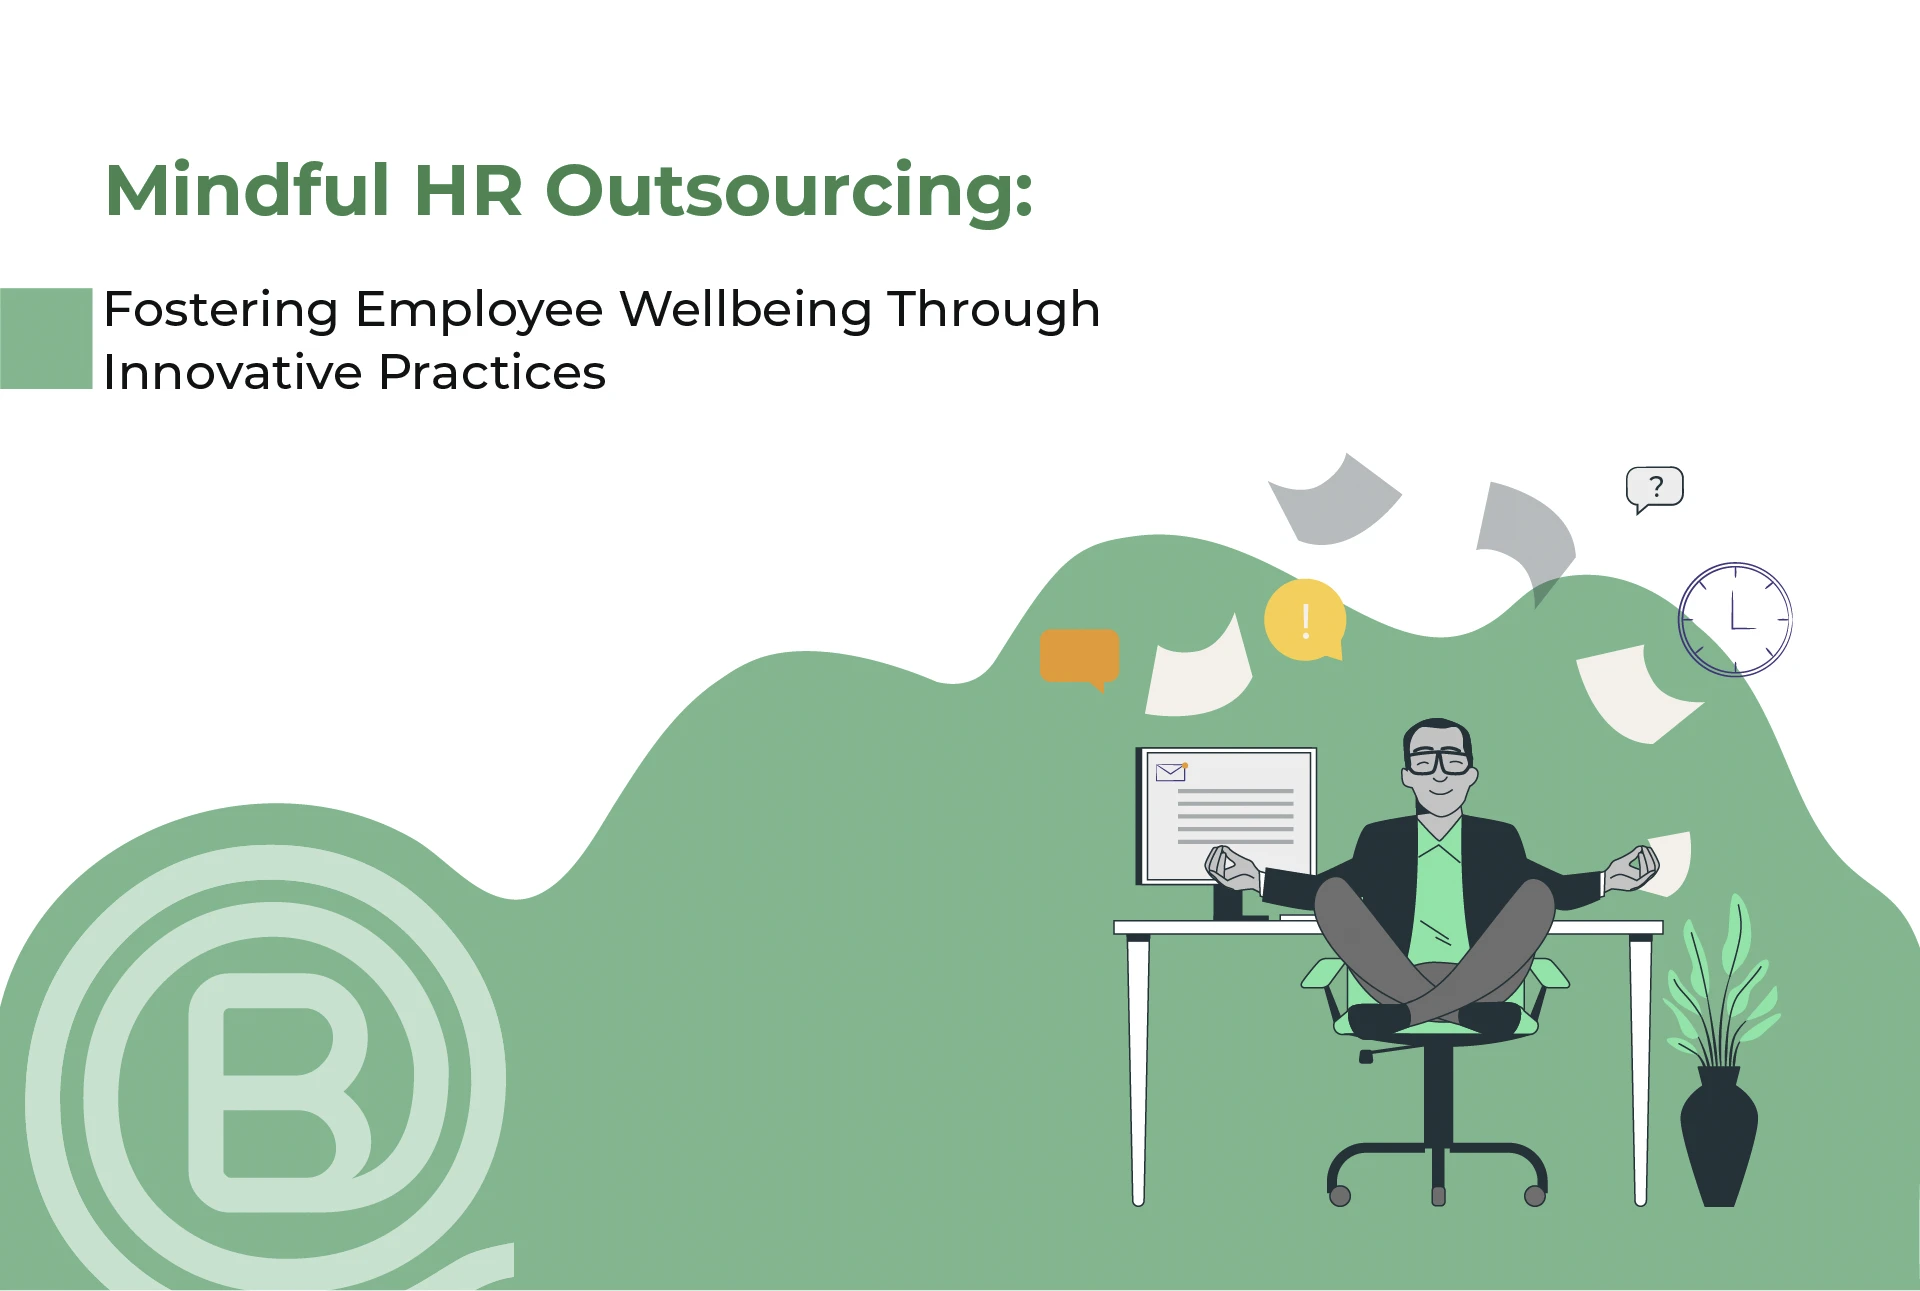 Mindful HR Outsourcing: Fostering Employee Wellbeing Through Innovative Practices